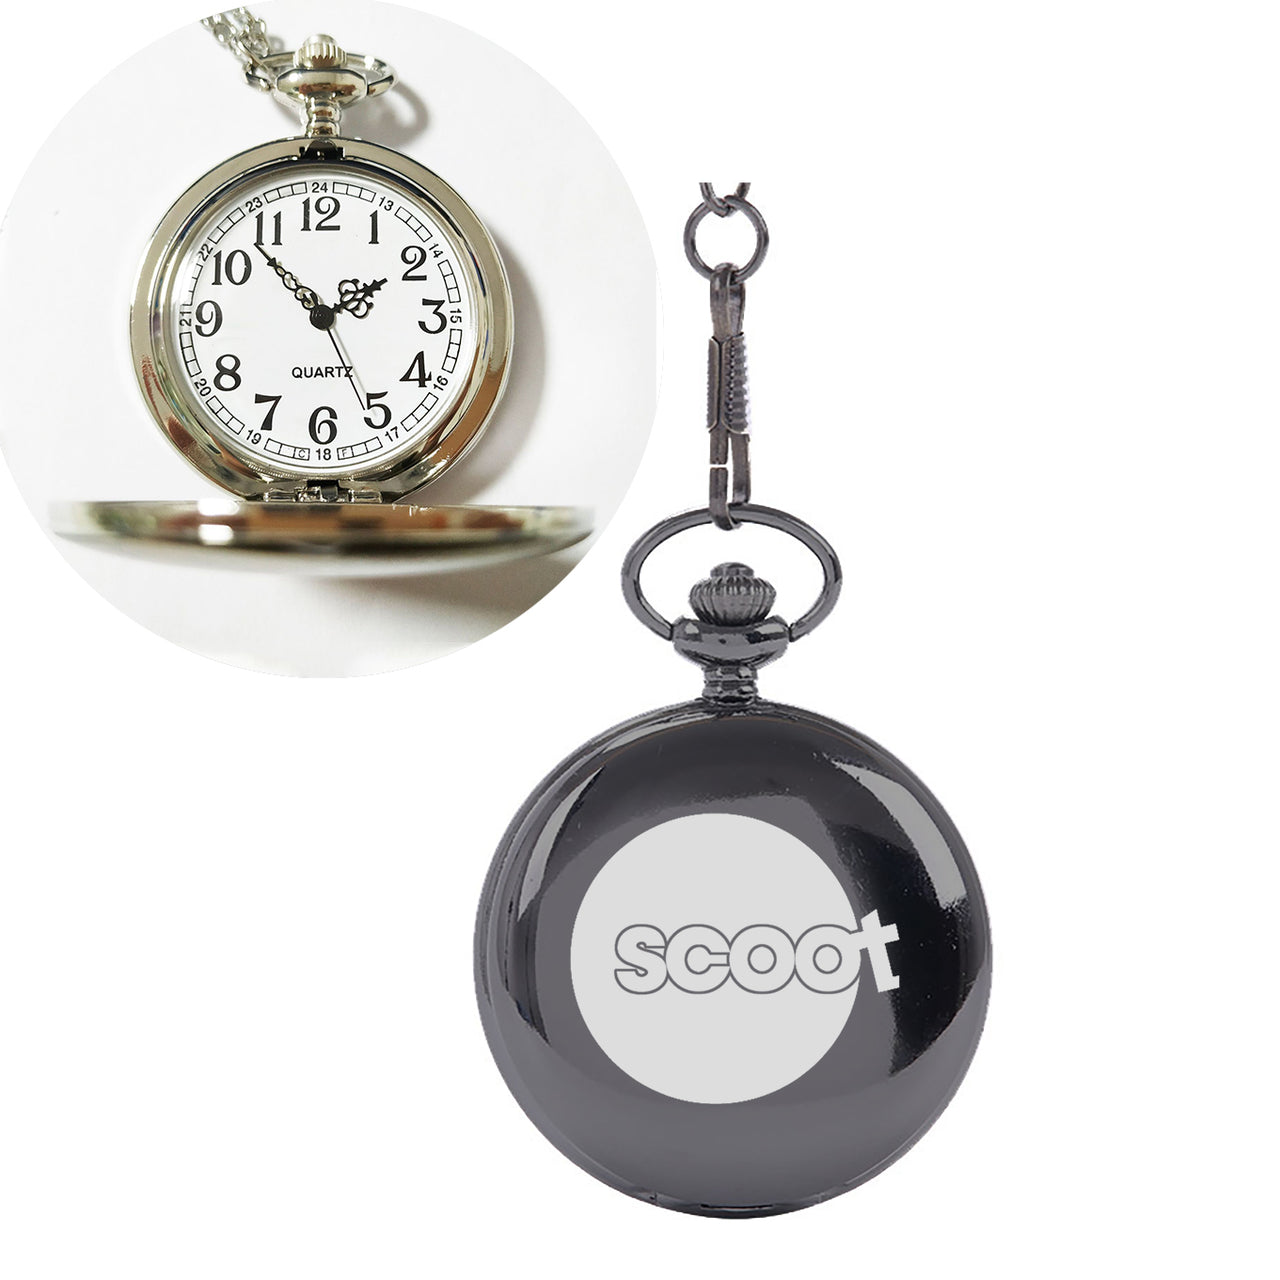 Scoot Airlines Designed Pocket Watches